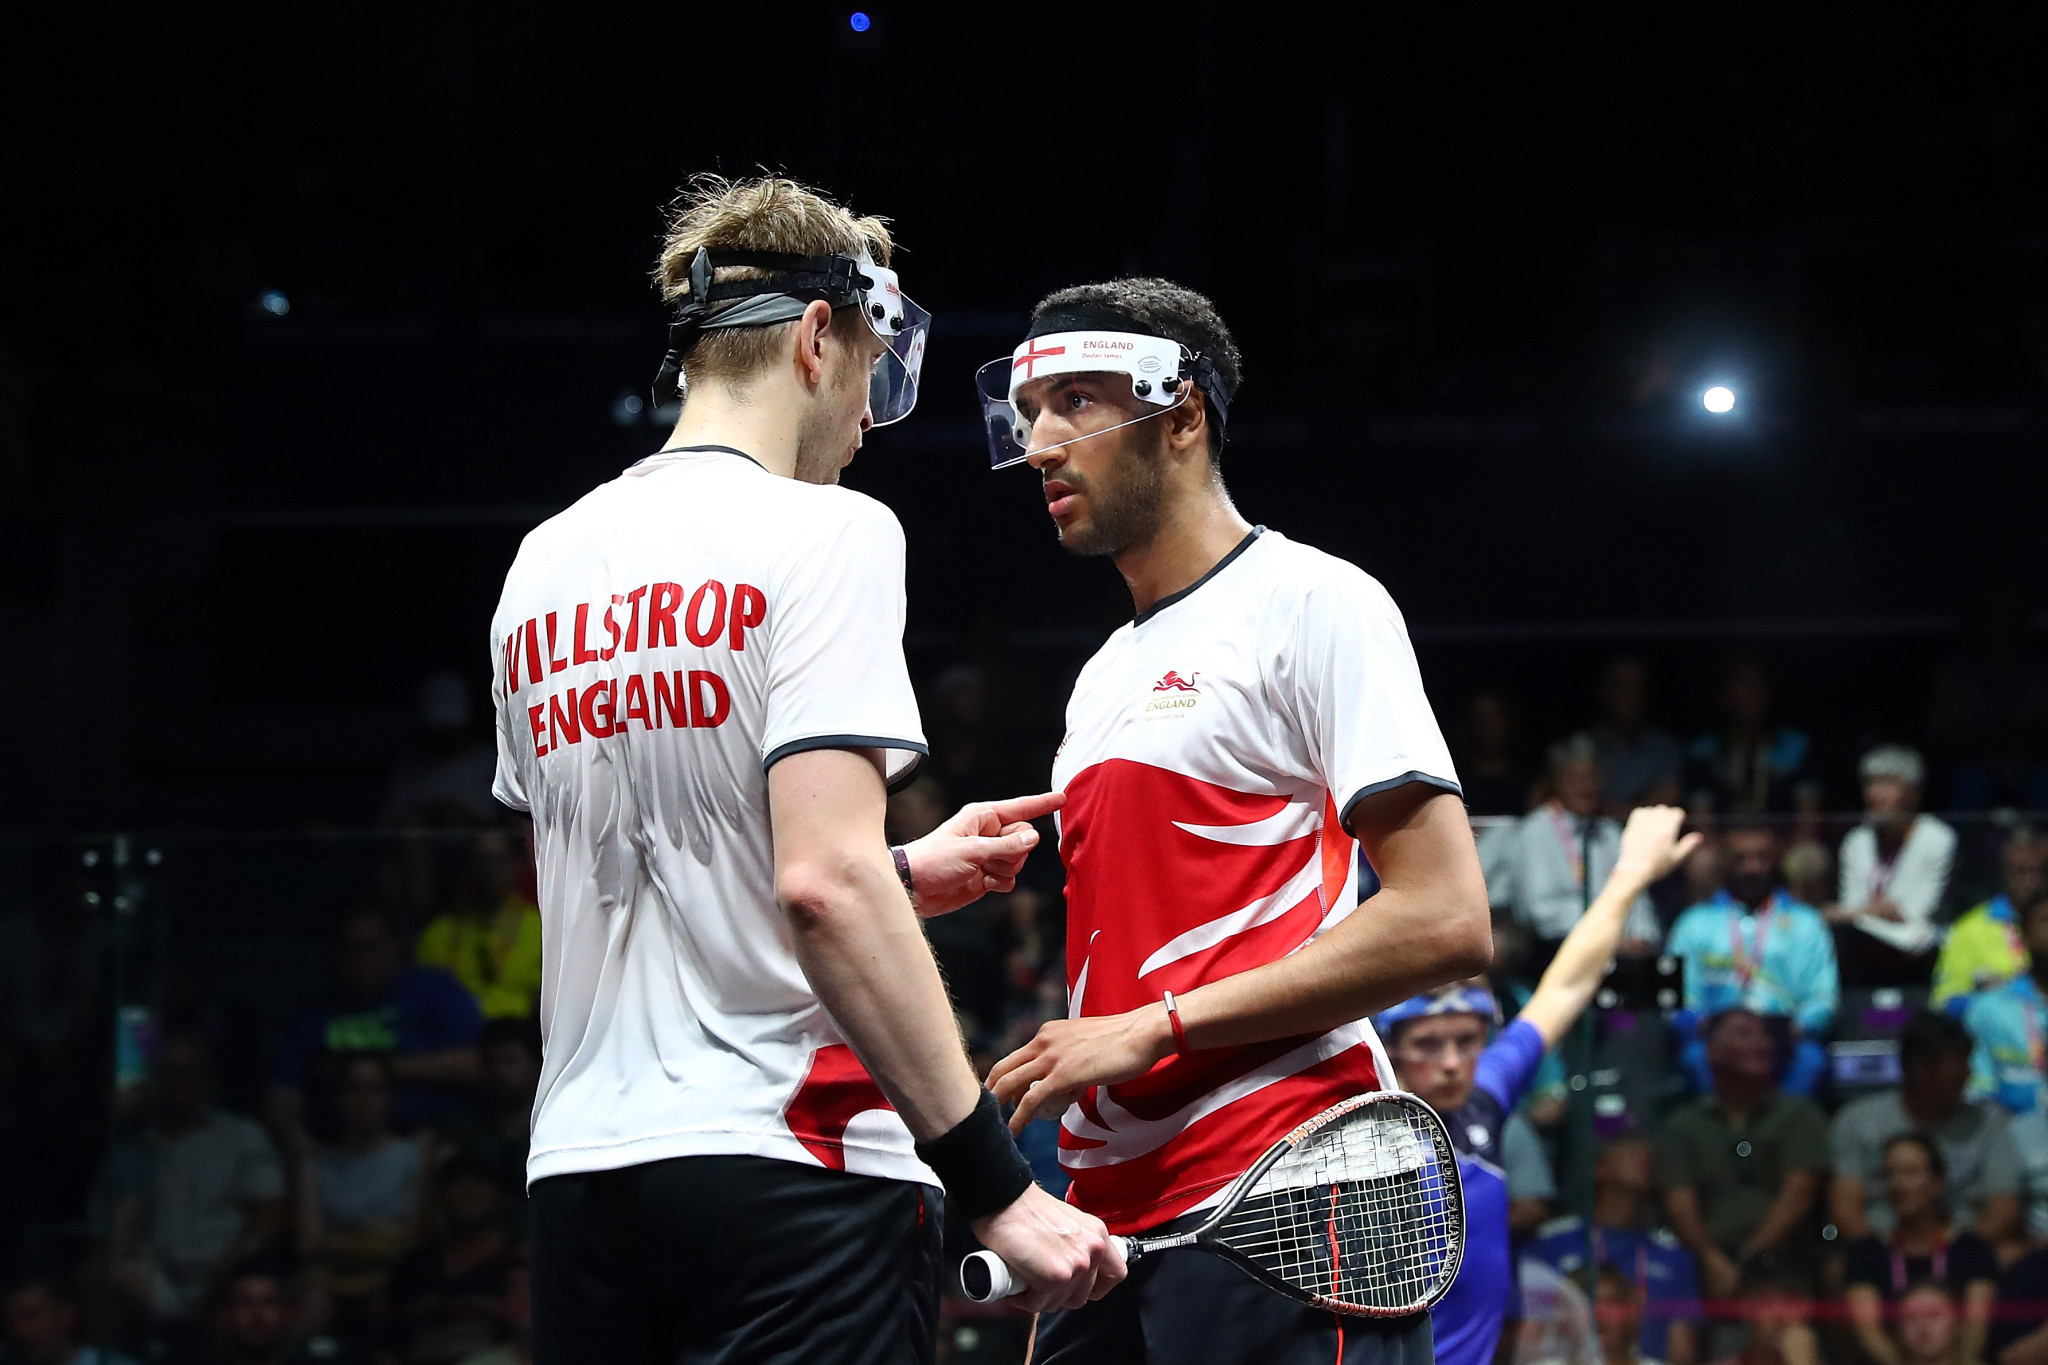 James Willstrop, left, and Declan James progressed to the World Doubles Squash Championships semi-finals in Glasgow ©Getty Images